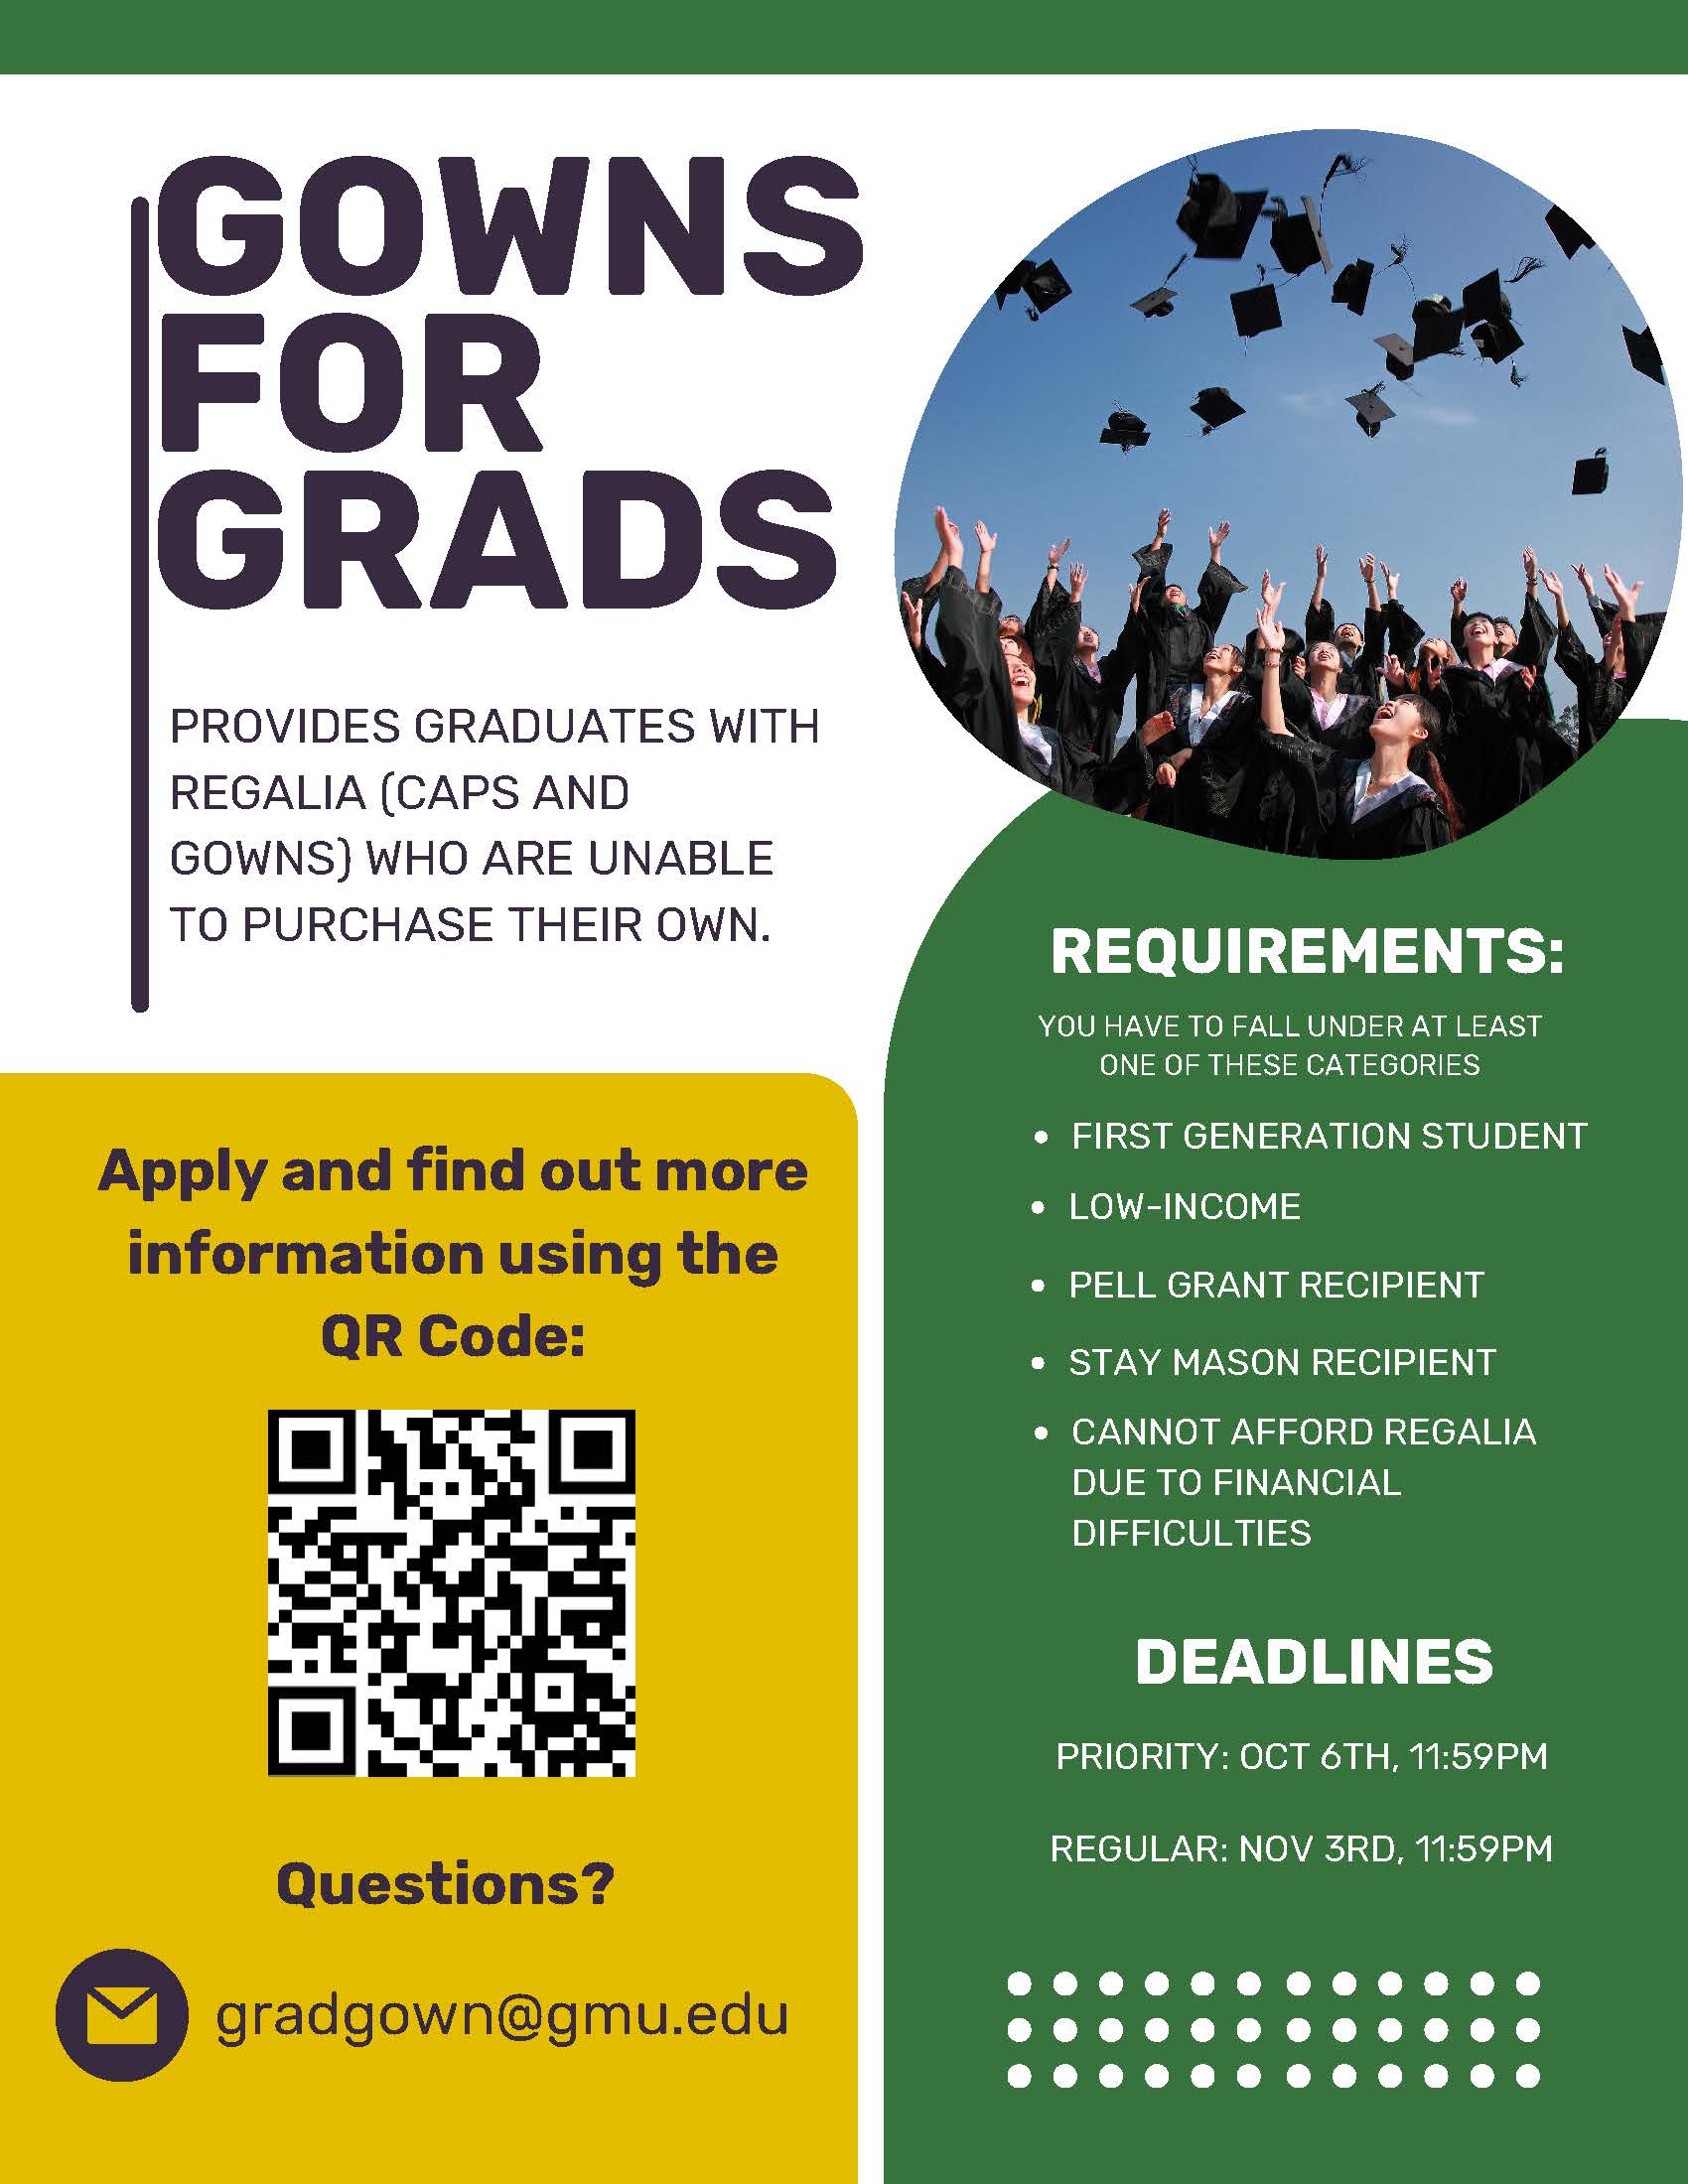 Gowns for Grads lending program - Fall 2023 application now open. Deadline to apply October 6, 2023 by 11:59pm, 2nd Deadline: November 3, 2023 by 11:59pm. 